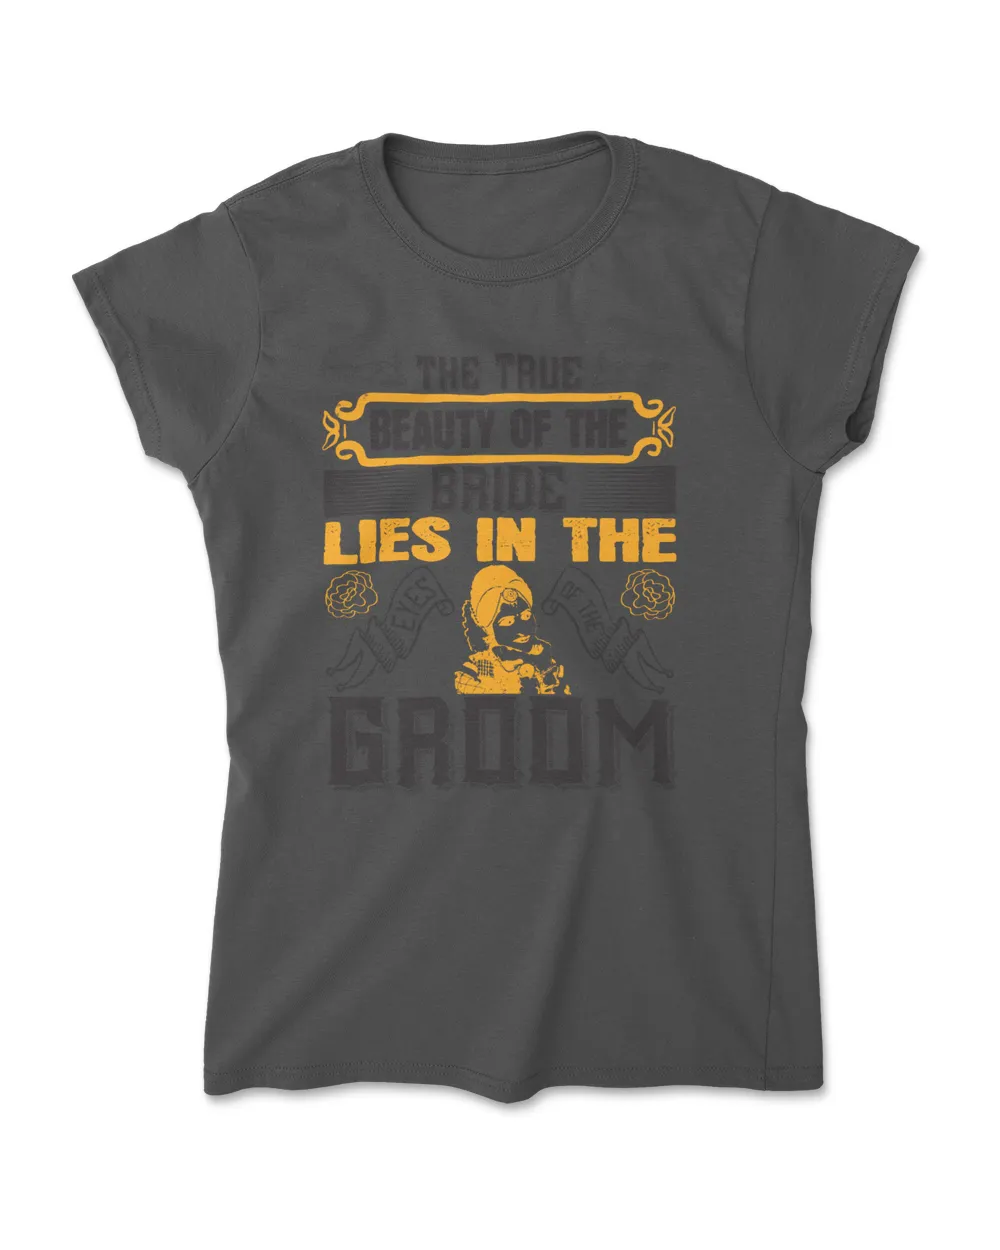 The True Beauty Of The Bride Lies In The Eyes Of The Groom Bride T-Shirt